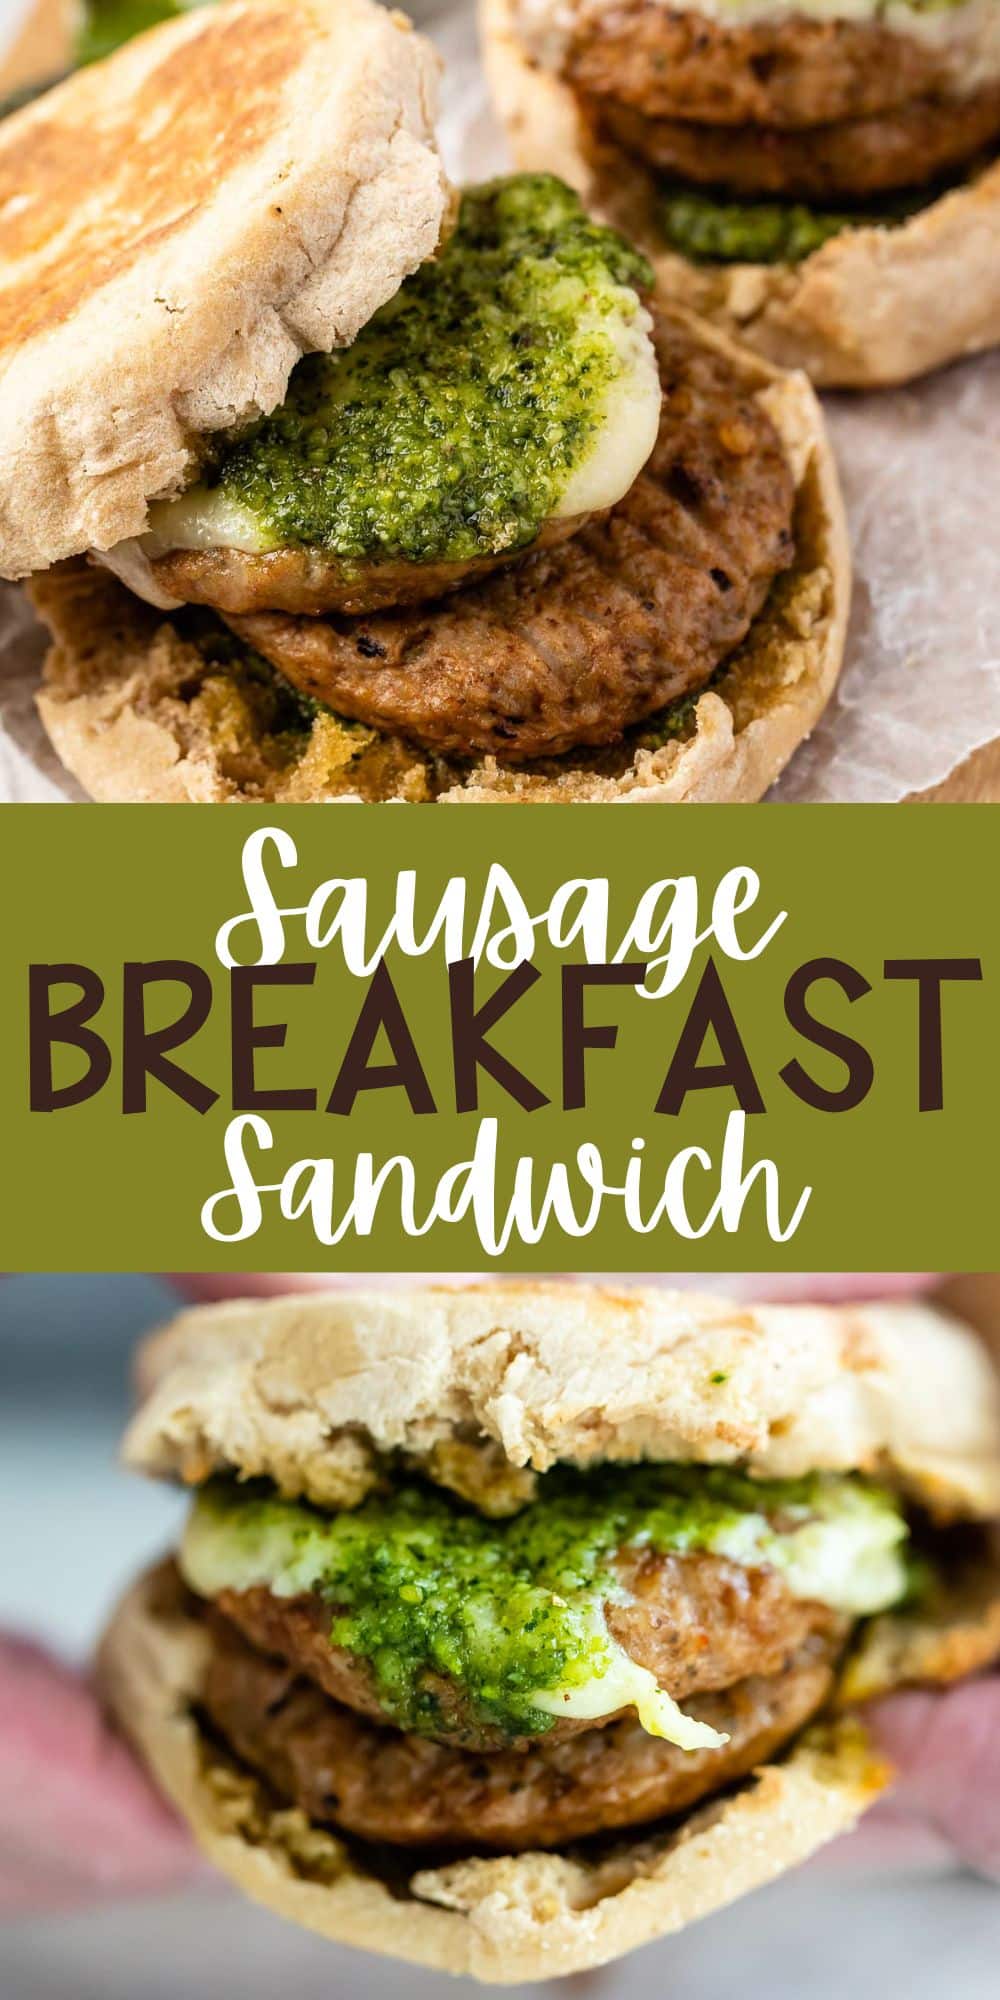 two photos of sausage cheese and pesto in a bun with words on the image.